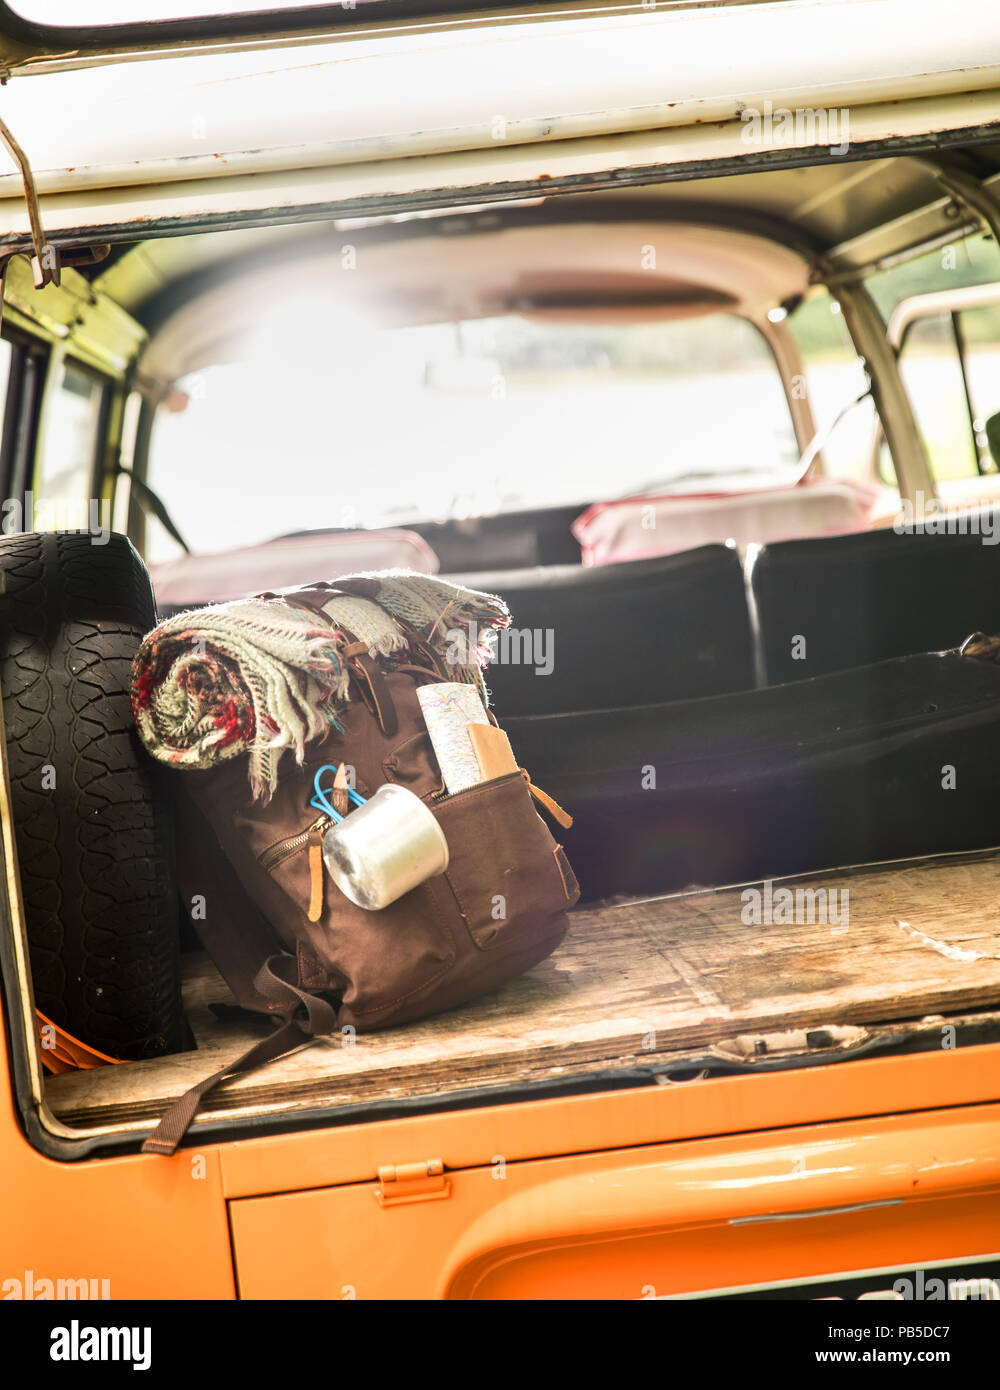 Backpack inside a truck, ready for hiking Stock Photo